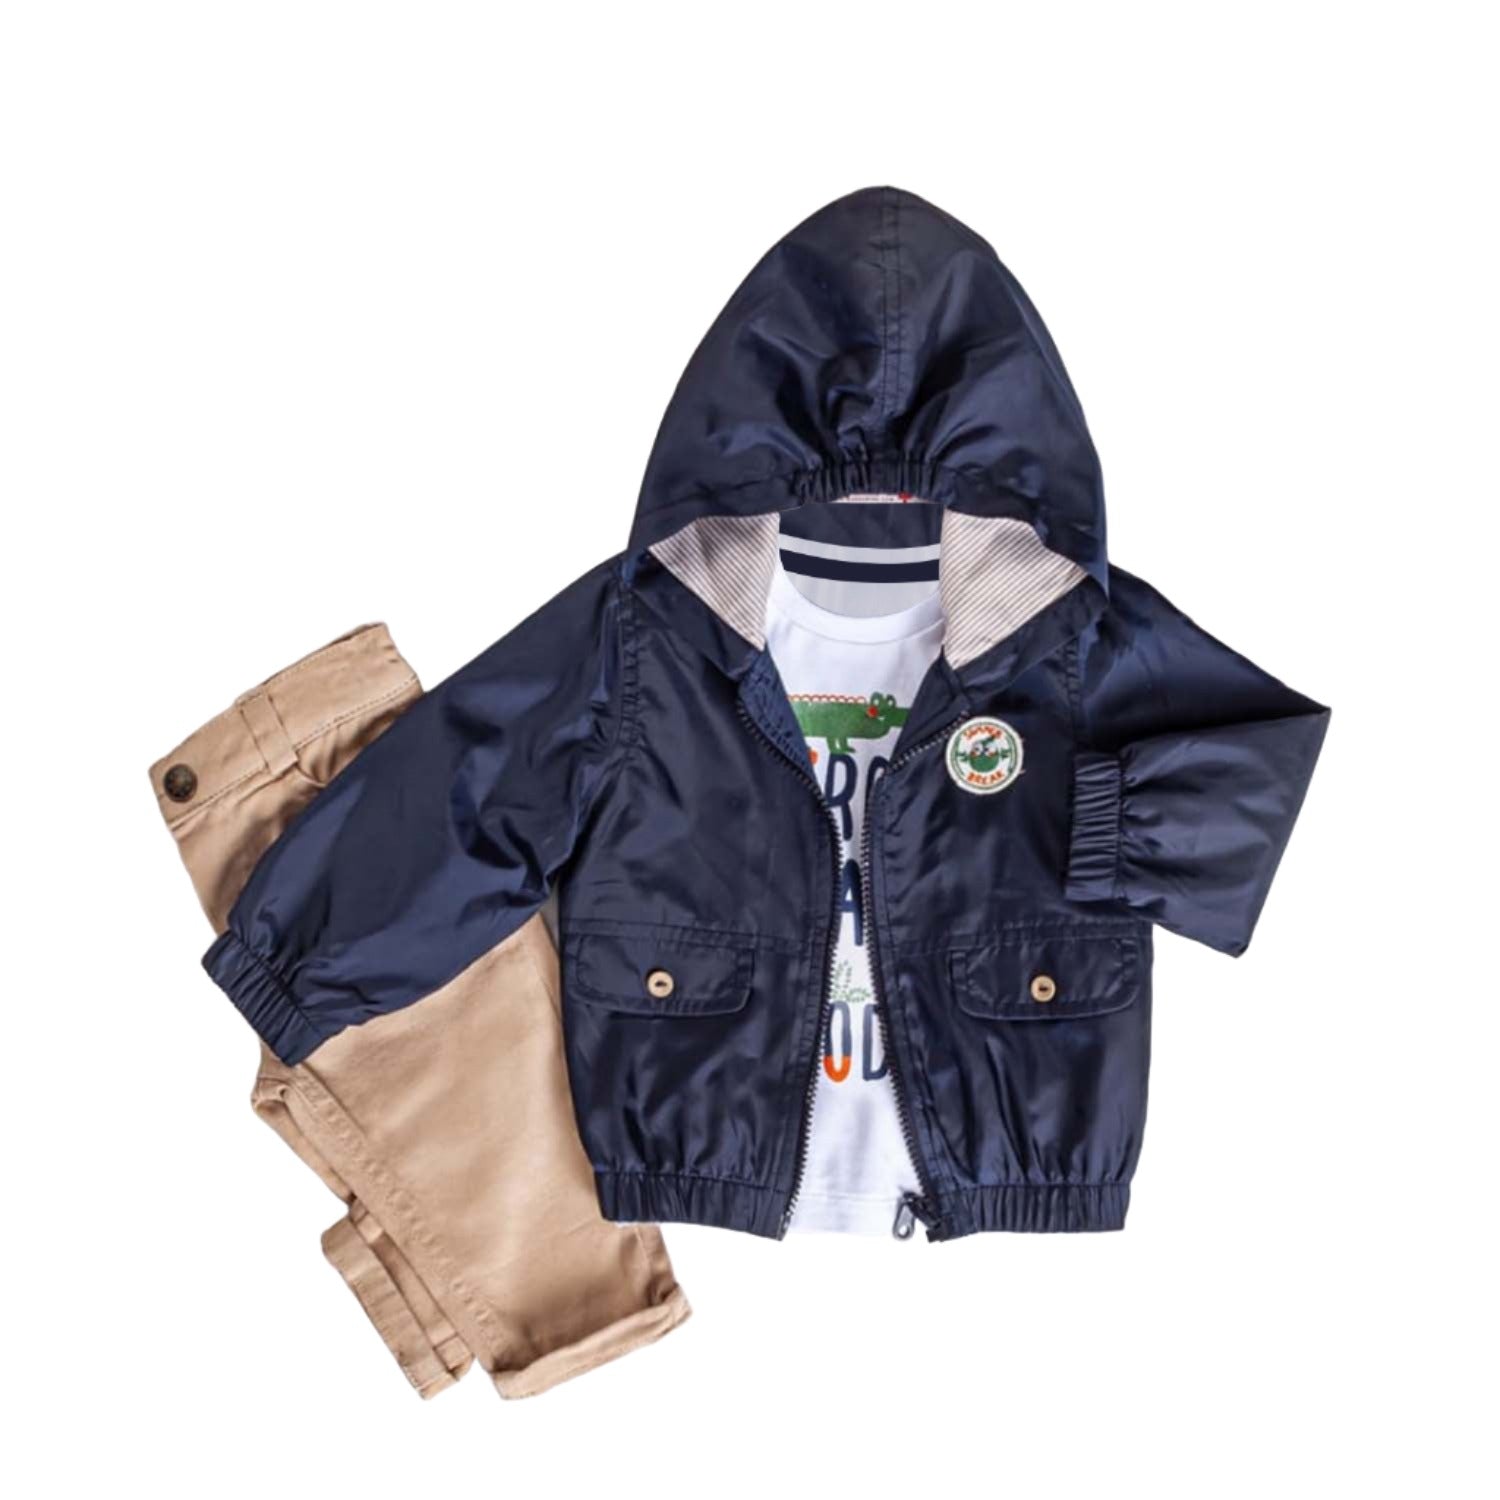 Infant and Toddler Hoodie Windbreaker 3-Piece Casual Wear - Great for Warm Weather